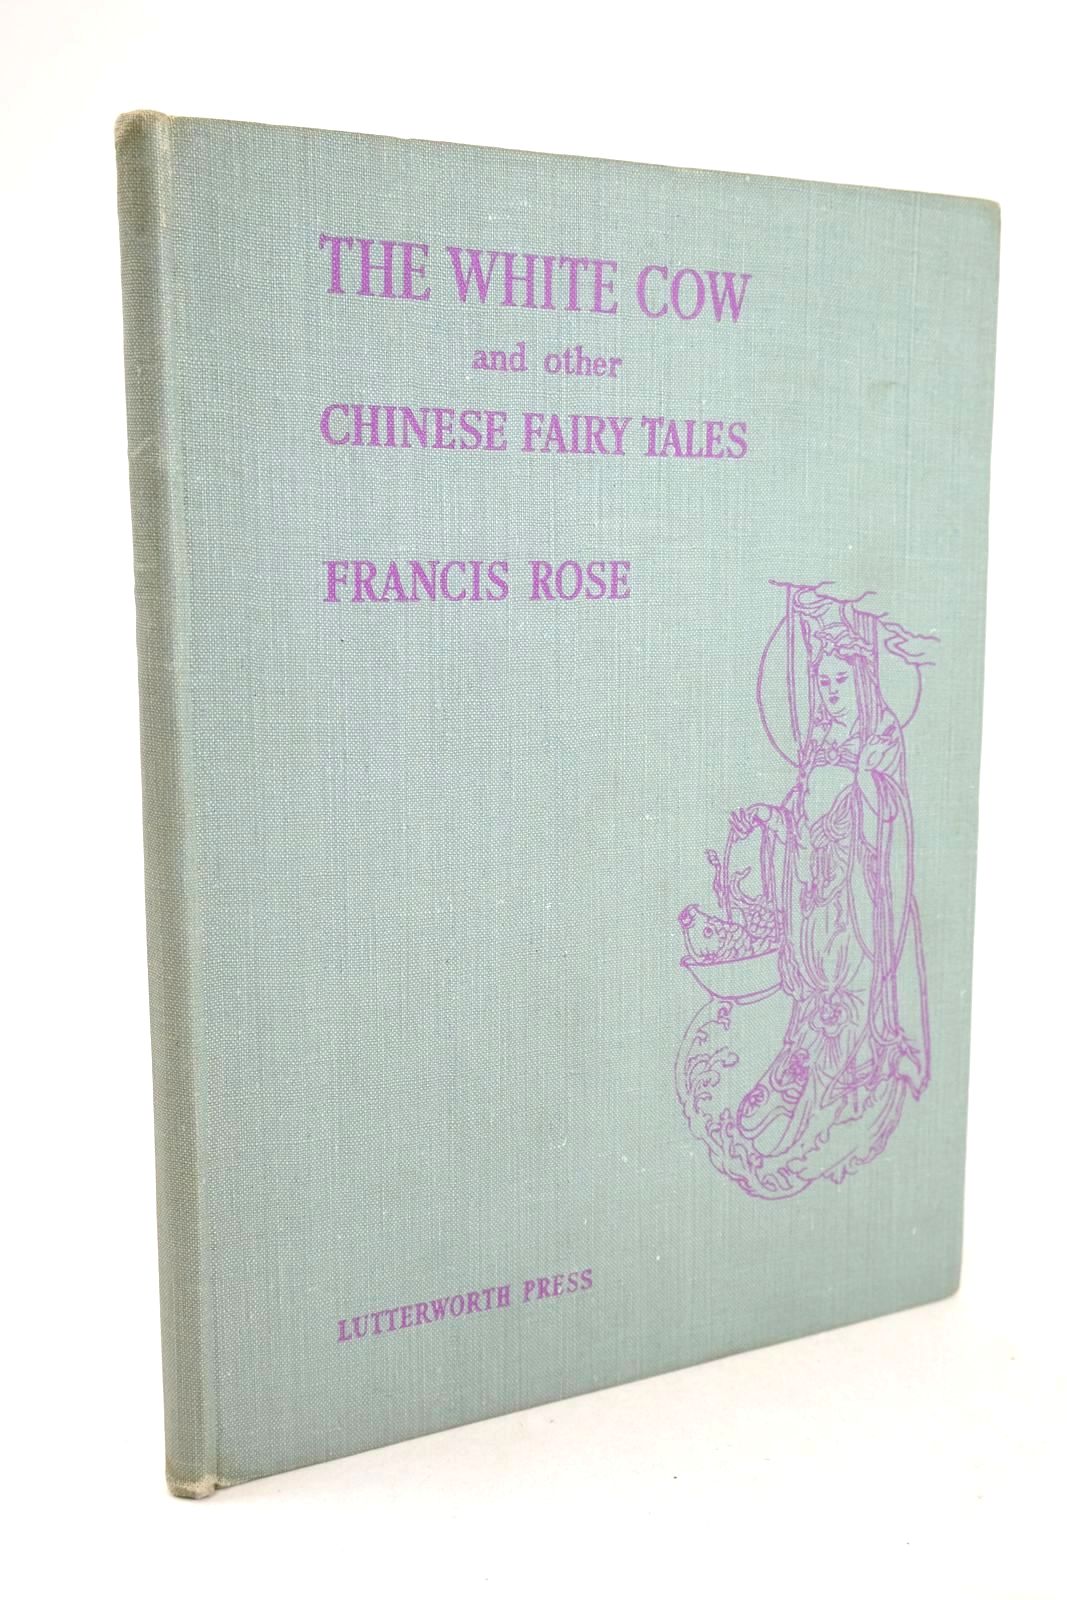 Photo of THE WHITE COW AND OTHER CHINESE FAIRY TALES- Stock Number: 1325902